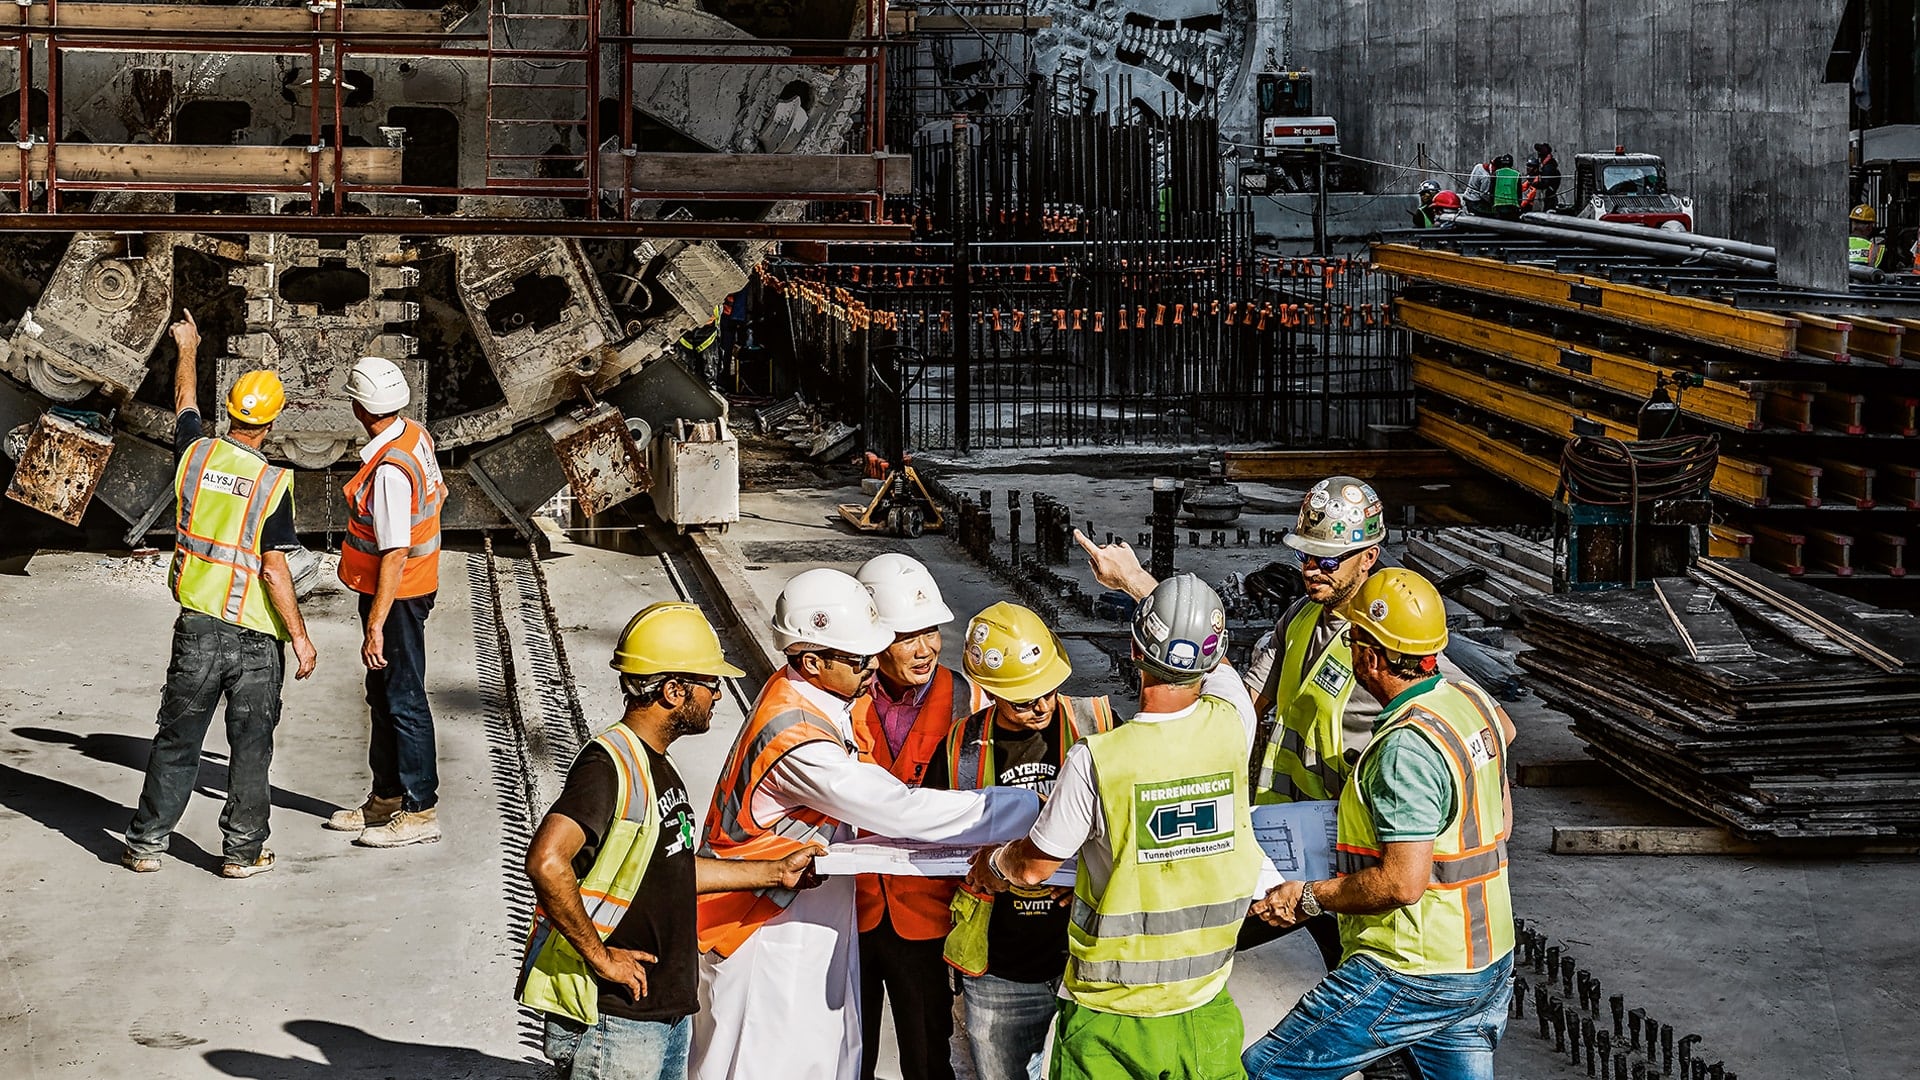 In the foreground, the construction site personnel are discussing a plan in their hands and in the background you can see other employees with two tunnel boring machines